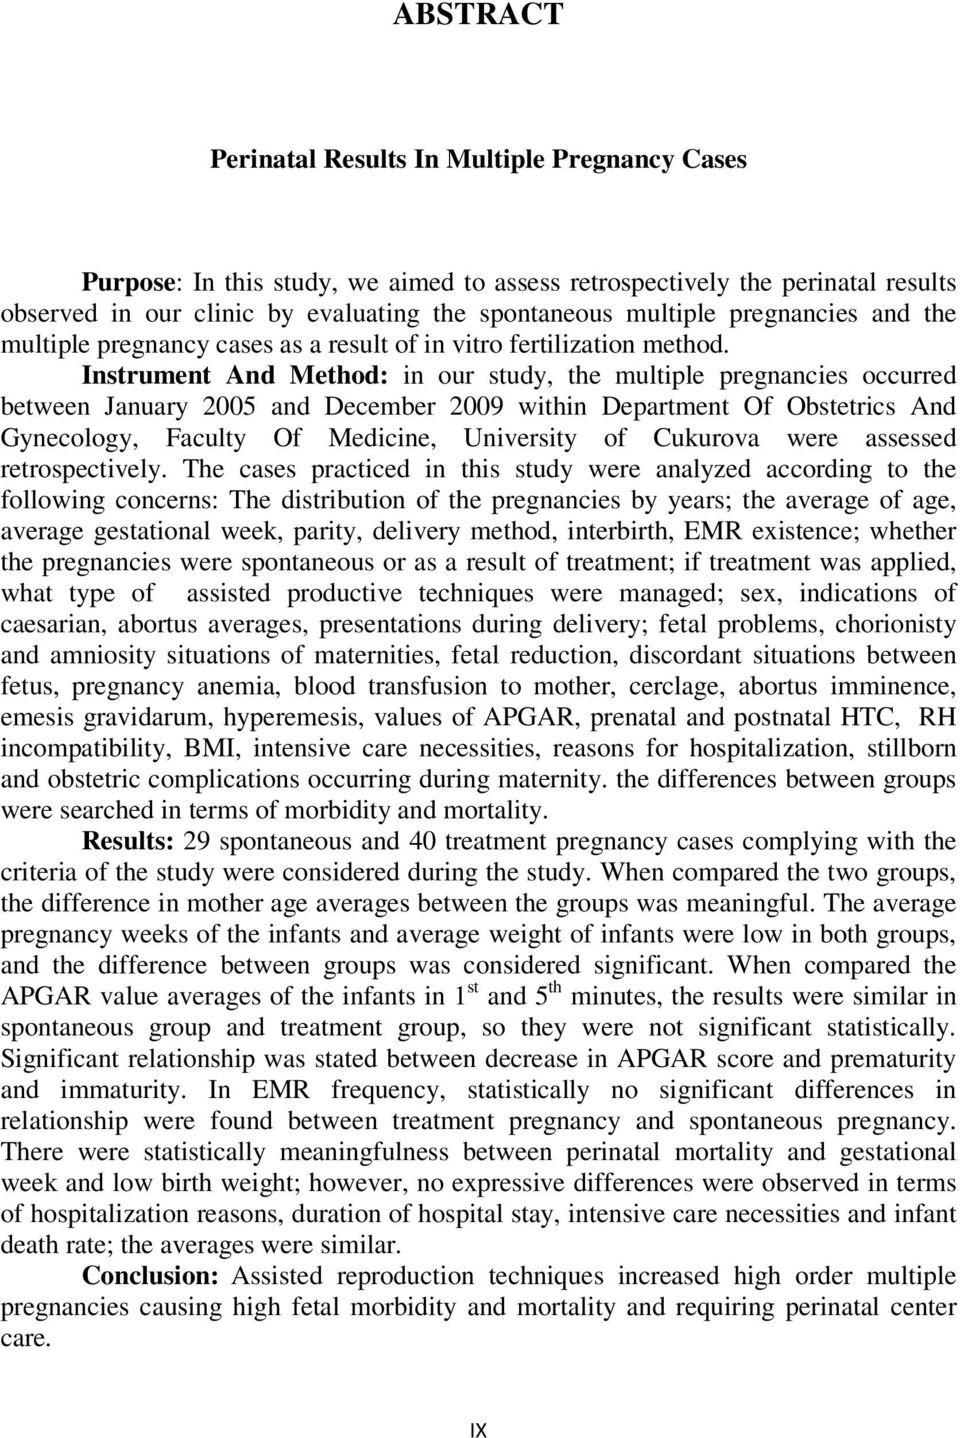 Instrument And Method: in our study, the multiple pregnancies occurred between January 2005 and December 2009 within Department Of Obstetrics And Gynecology, Faculty Of Medicine, University of